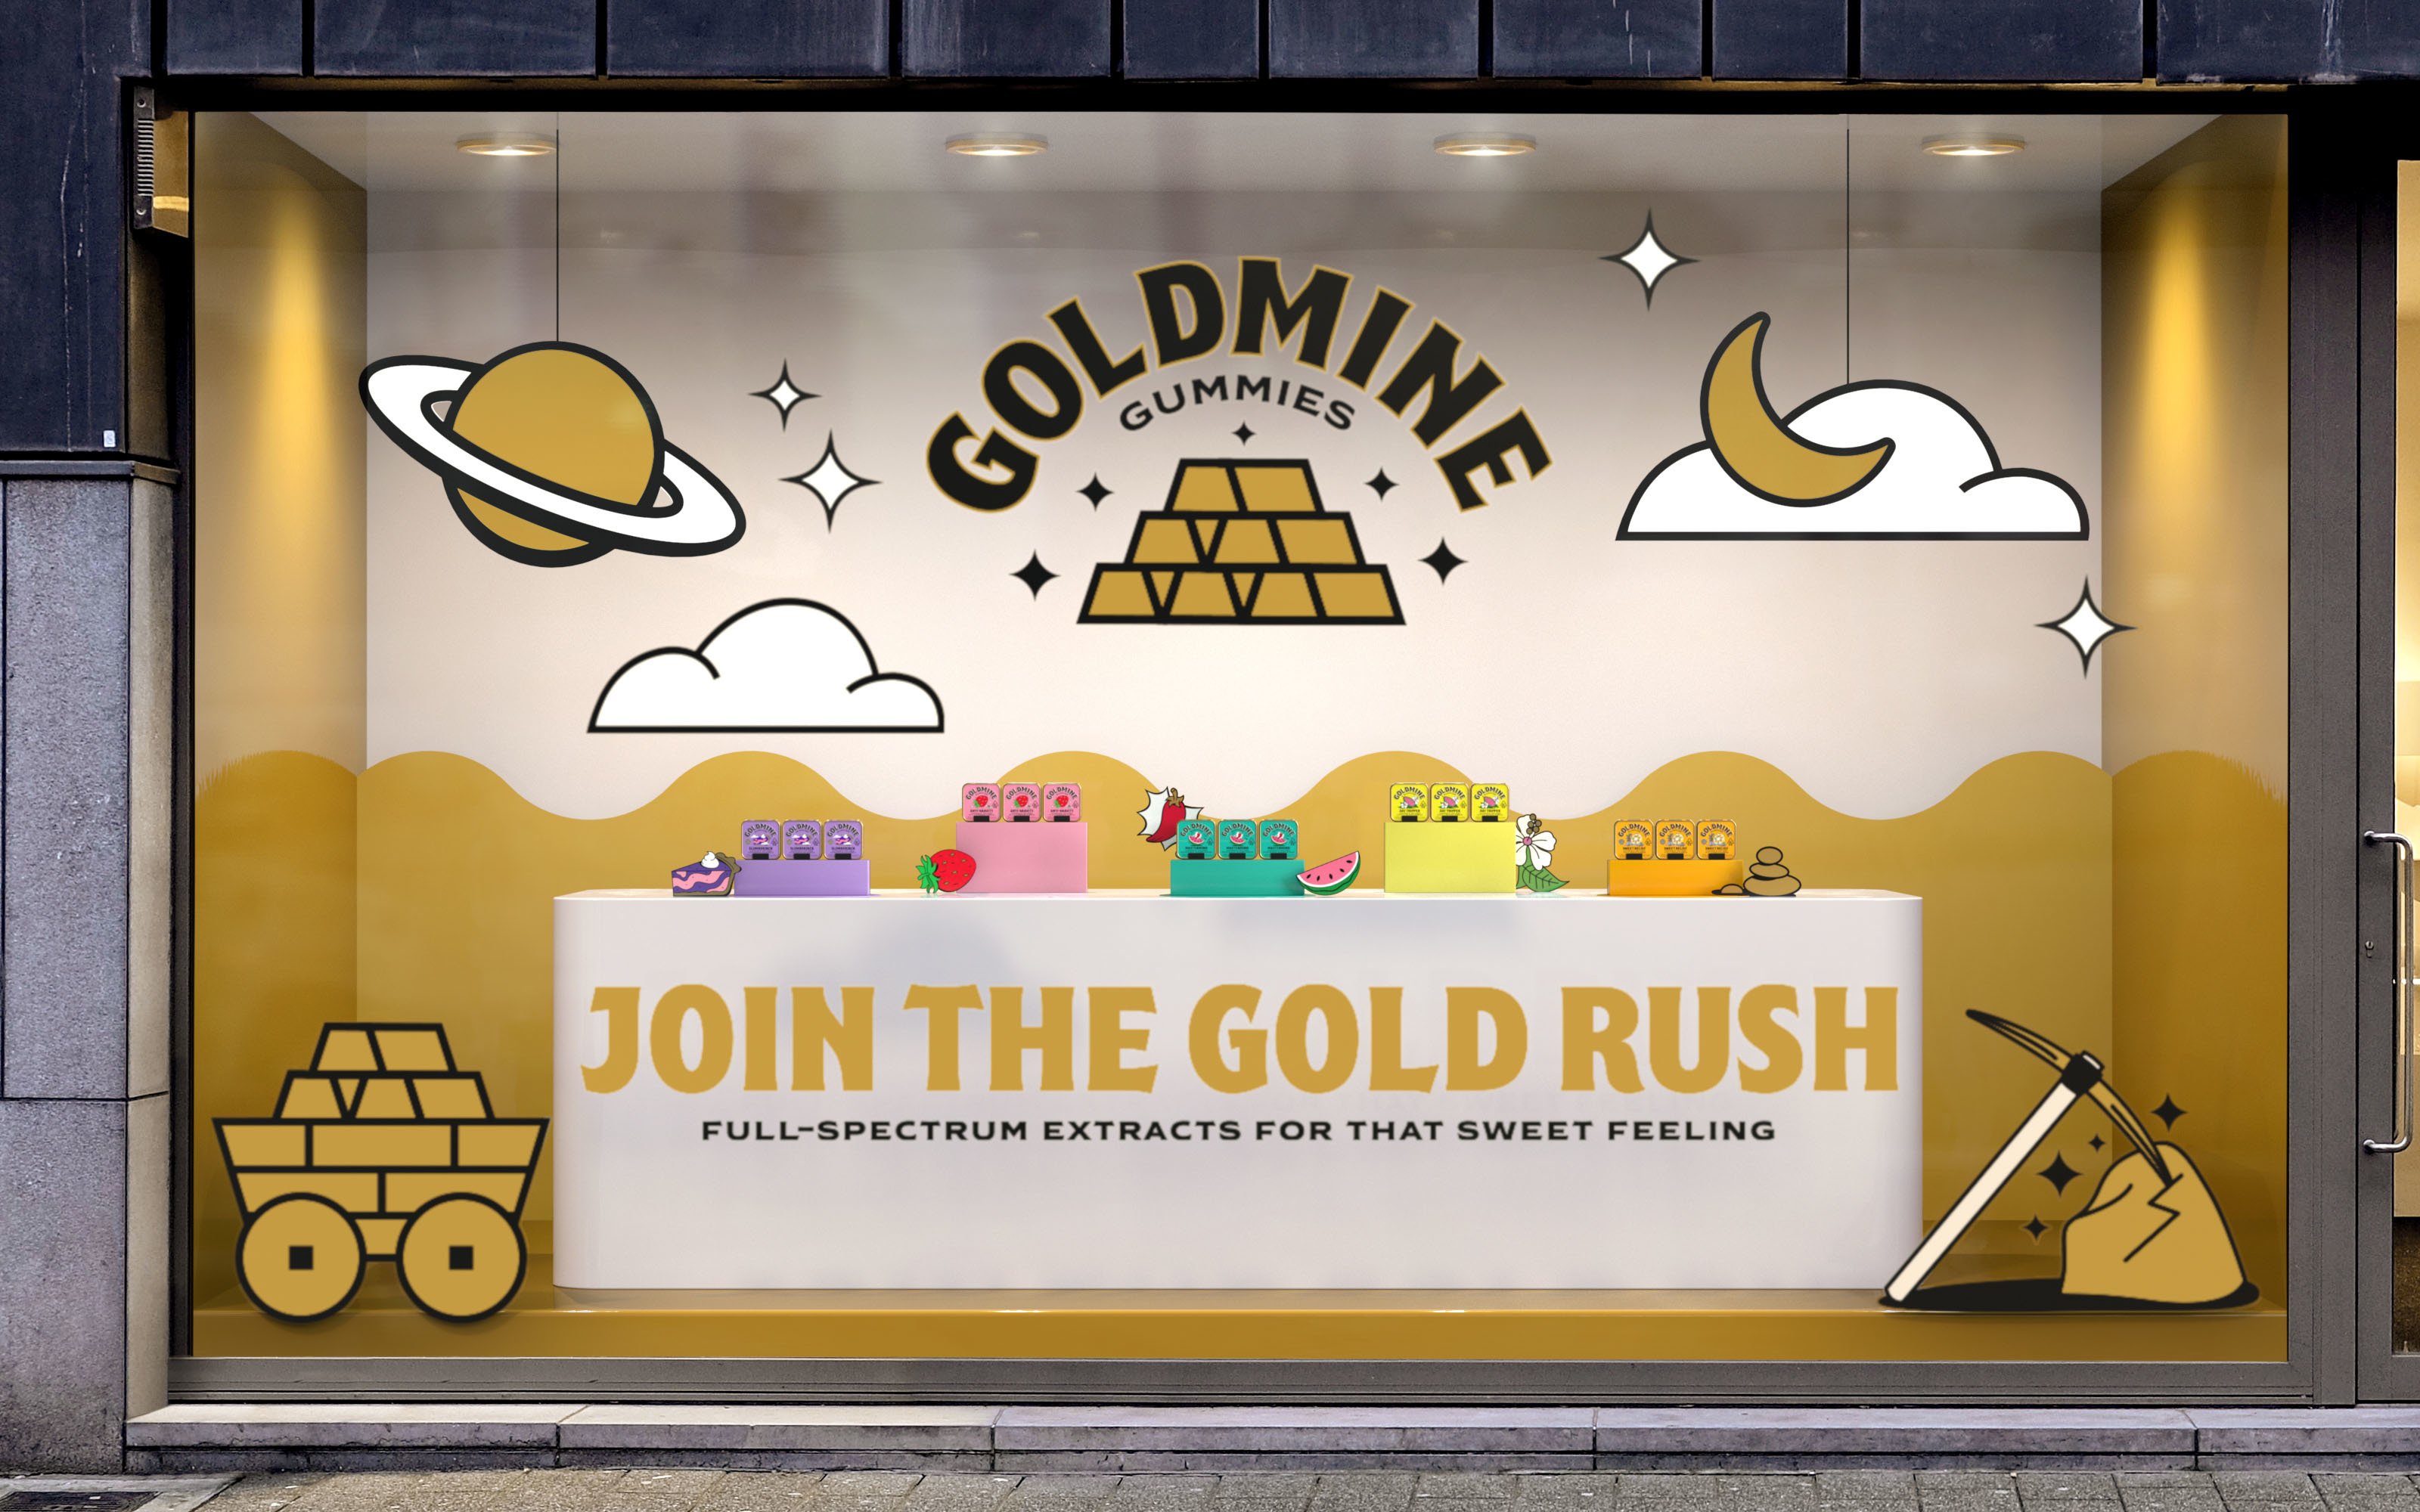 Brand identity and window display by Leeds-based Robot Food for California cannabis-infused sweets brand Goldmine Gummies